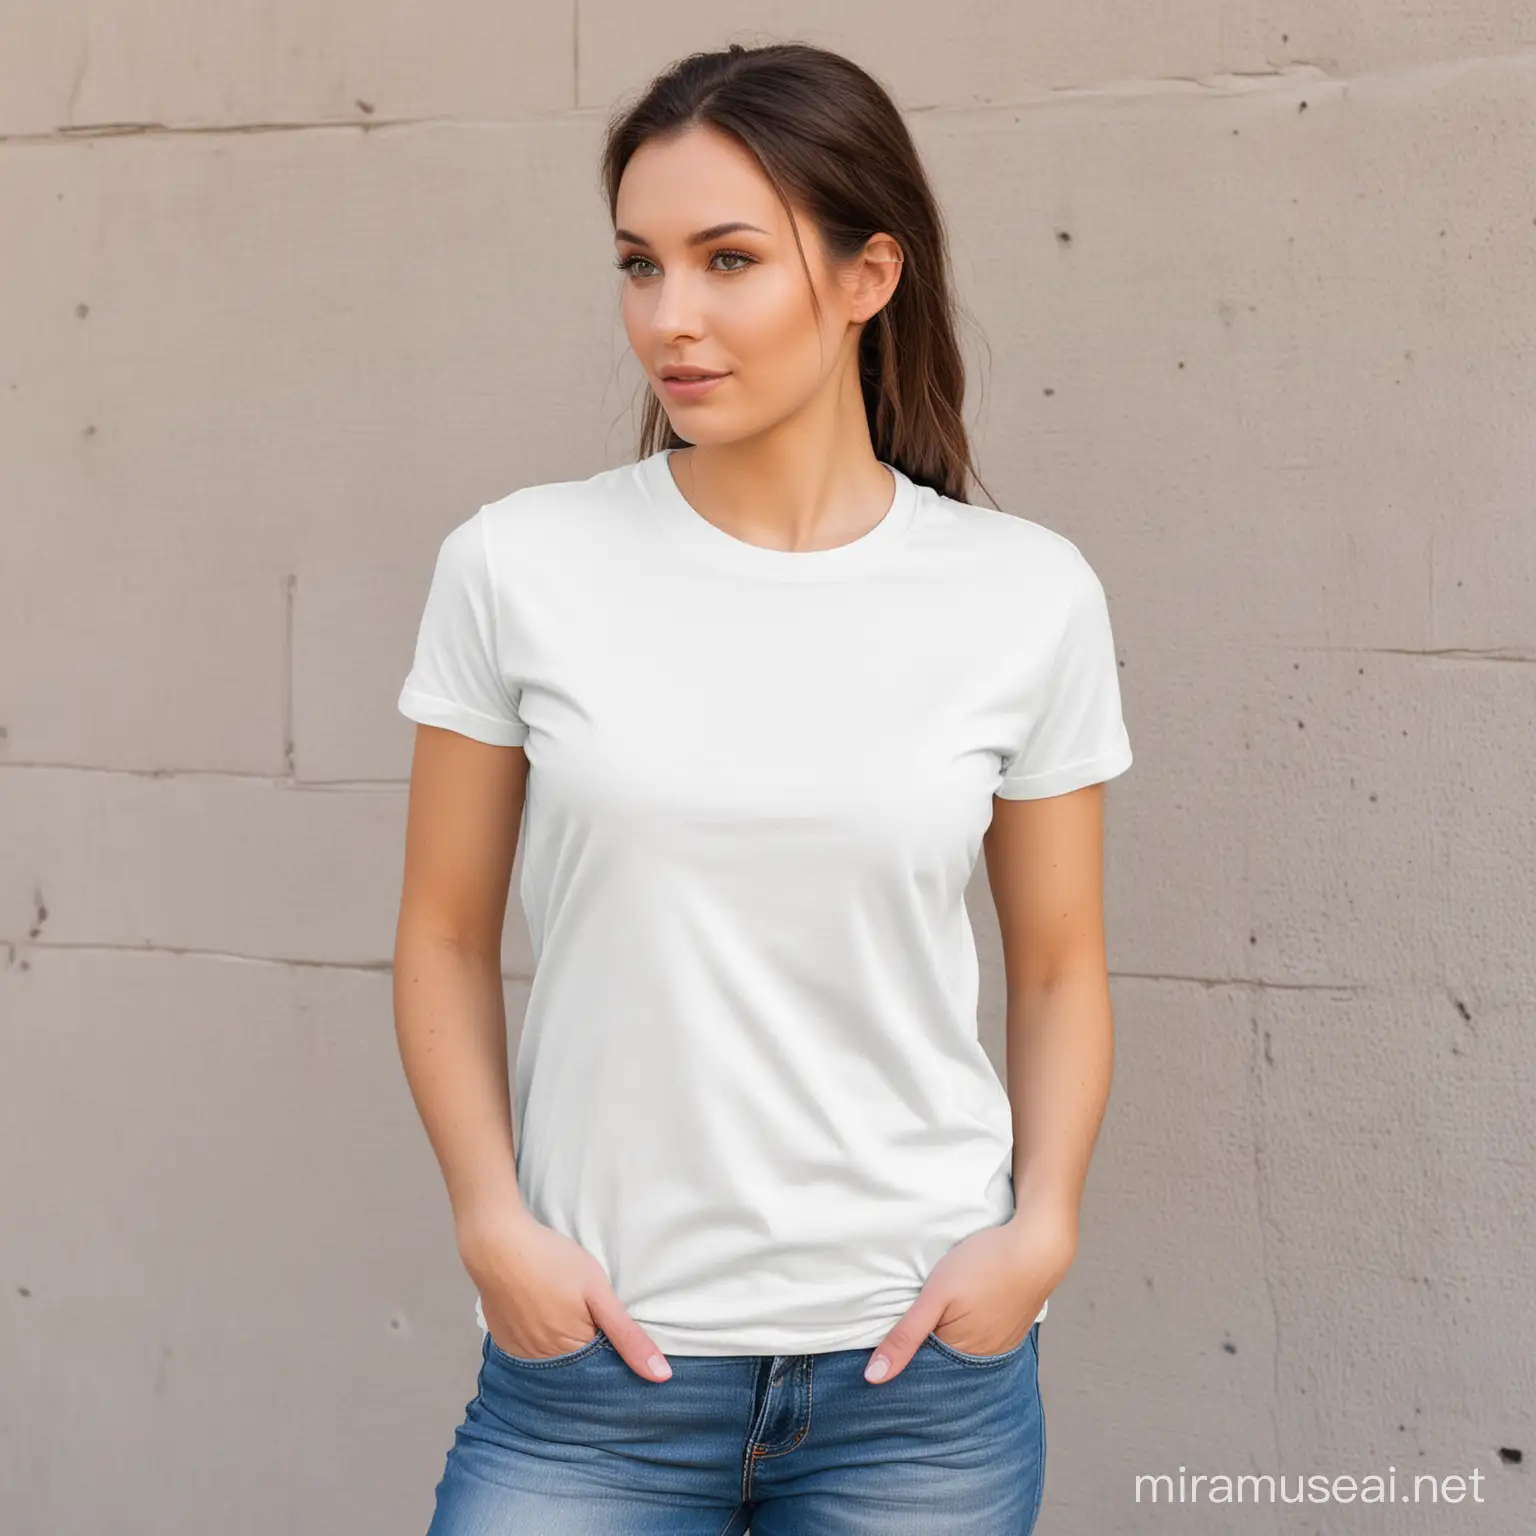 BellaCanvas 3001 Mockup White Top with Blank Design